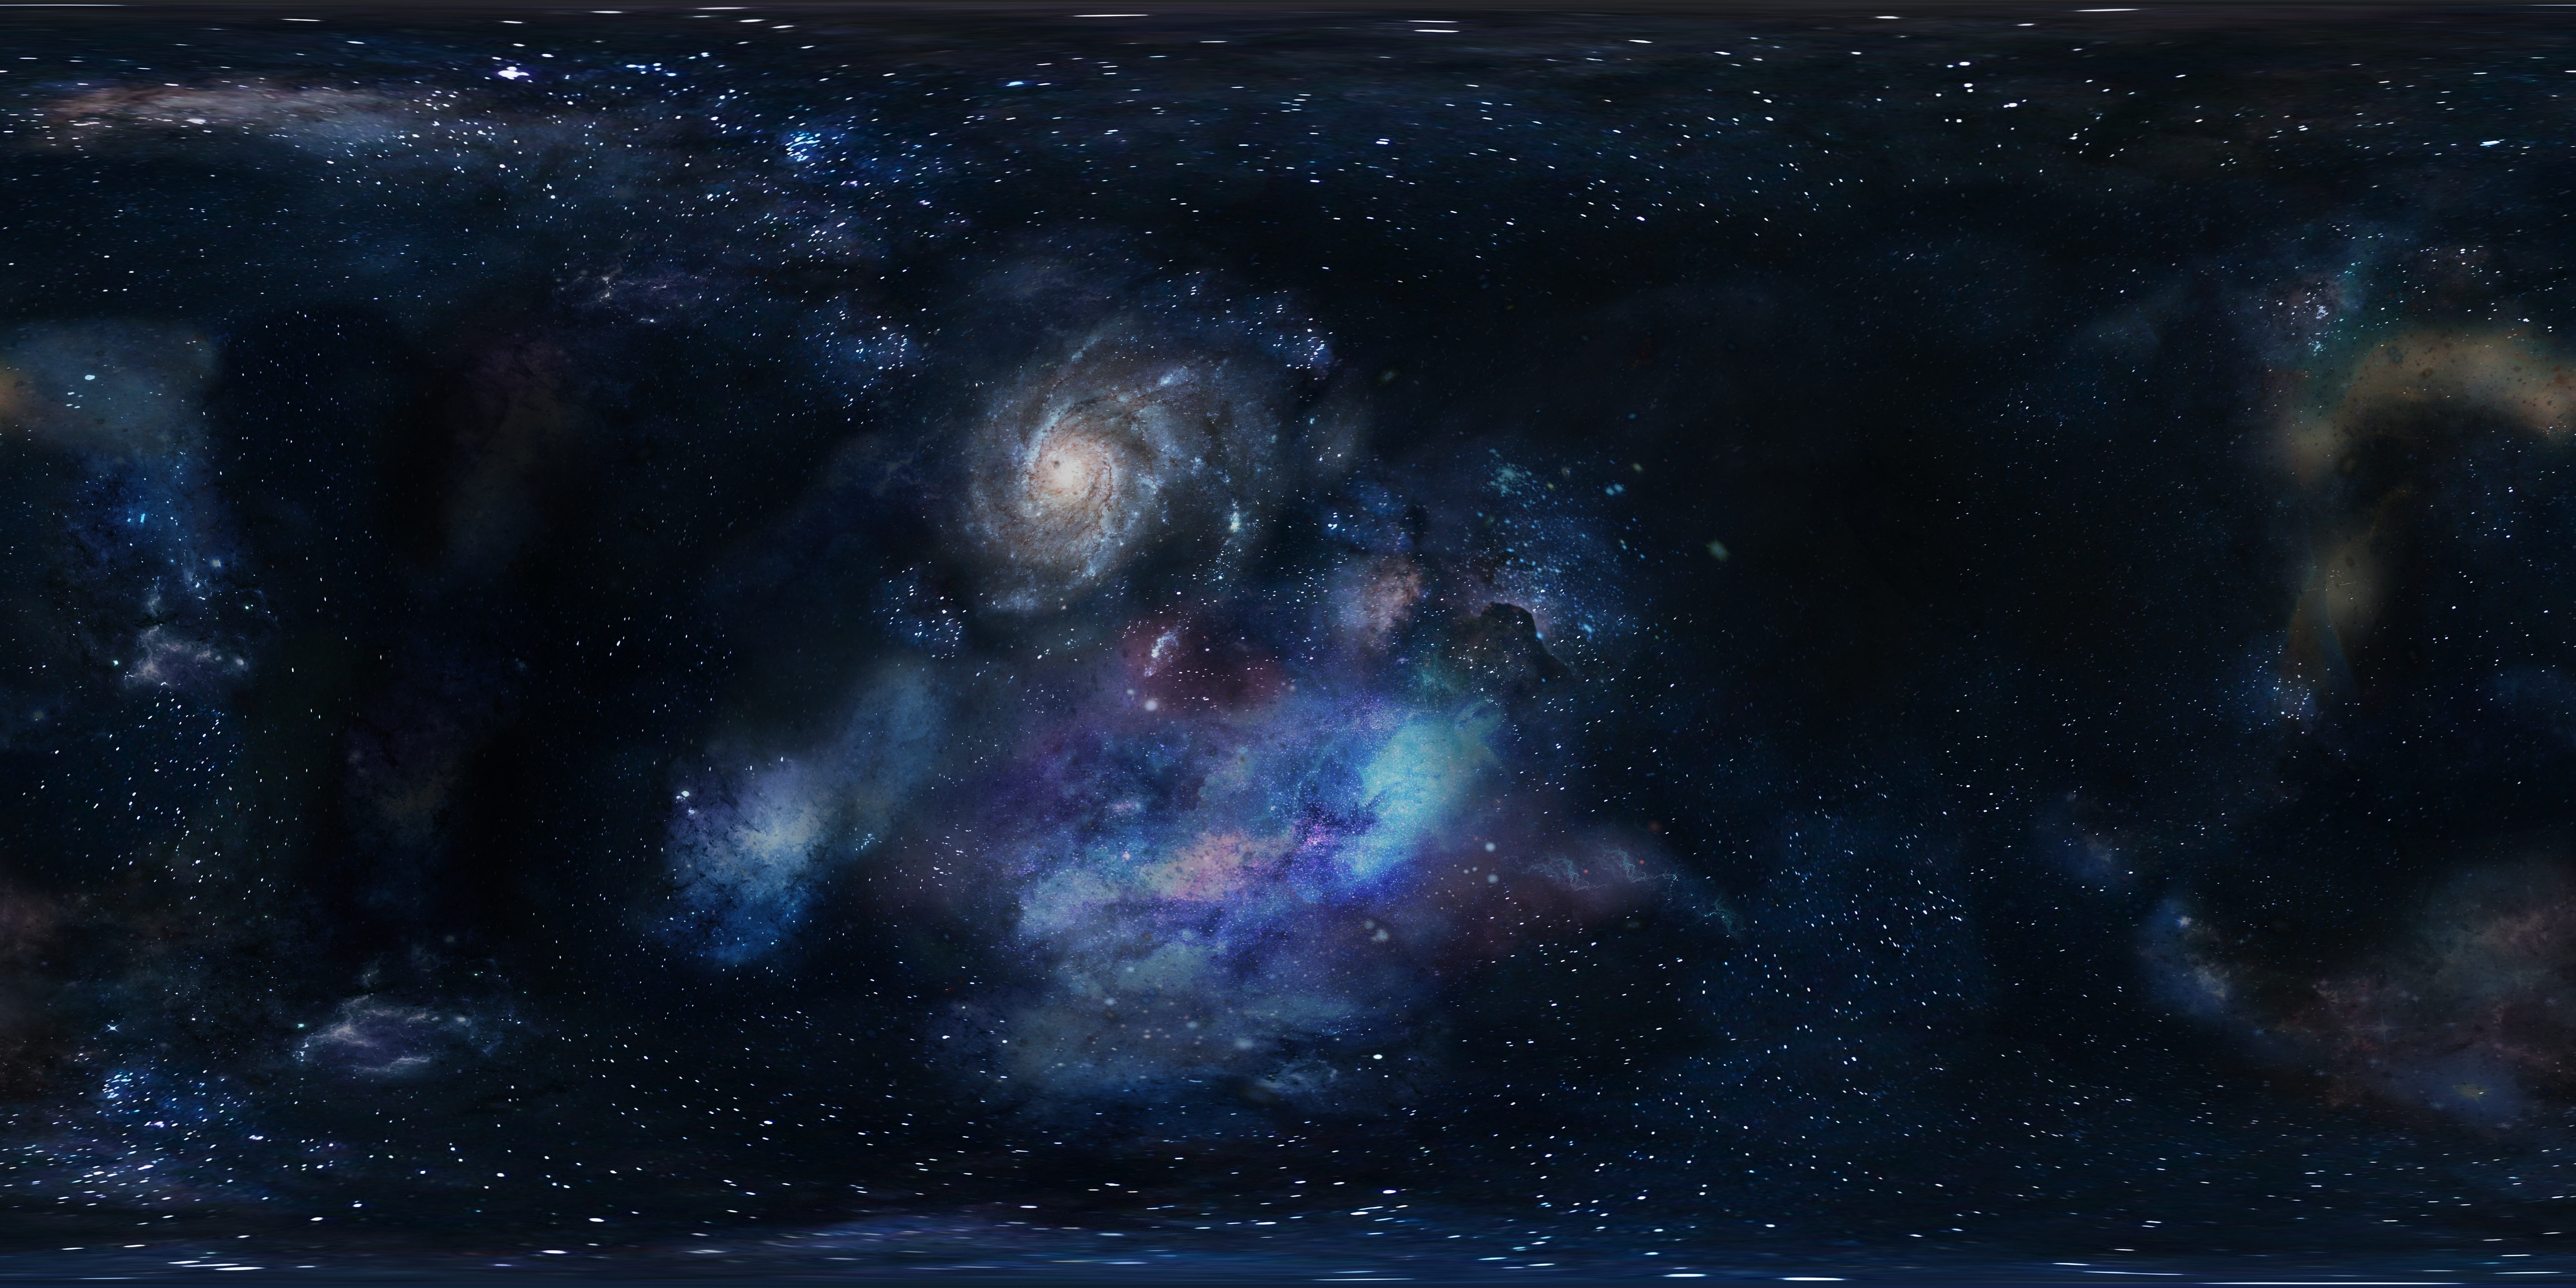 stars, galaxy, universe, space Image for desktop